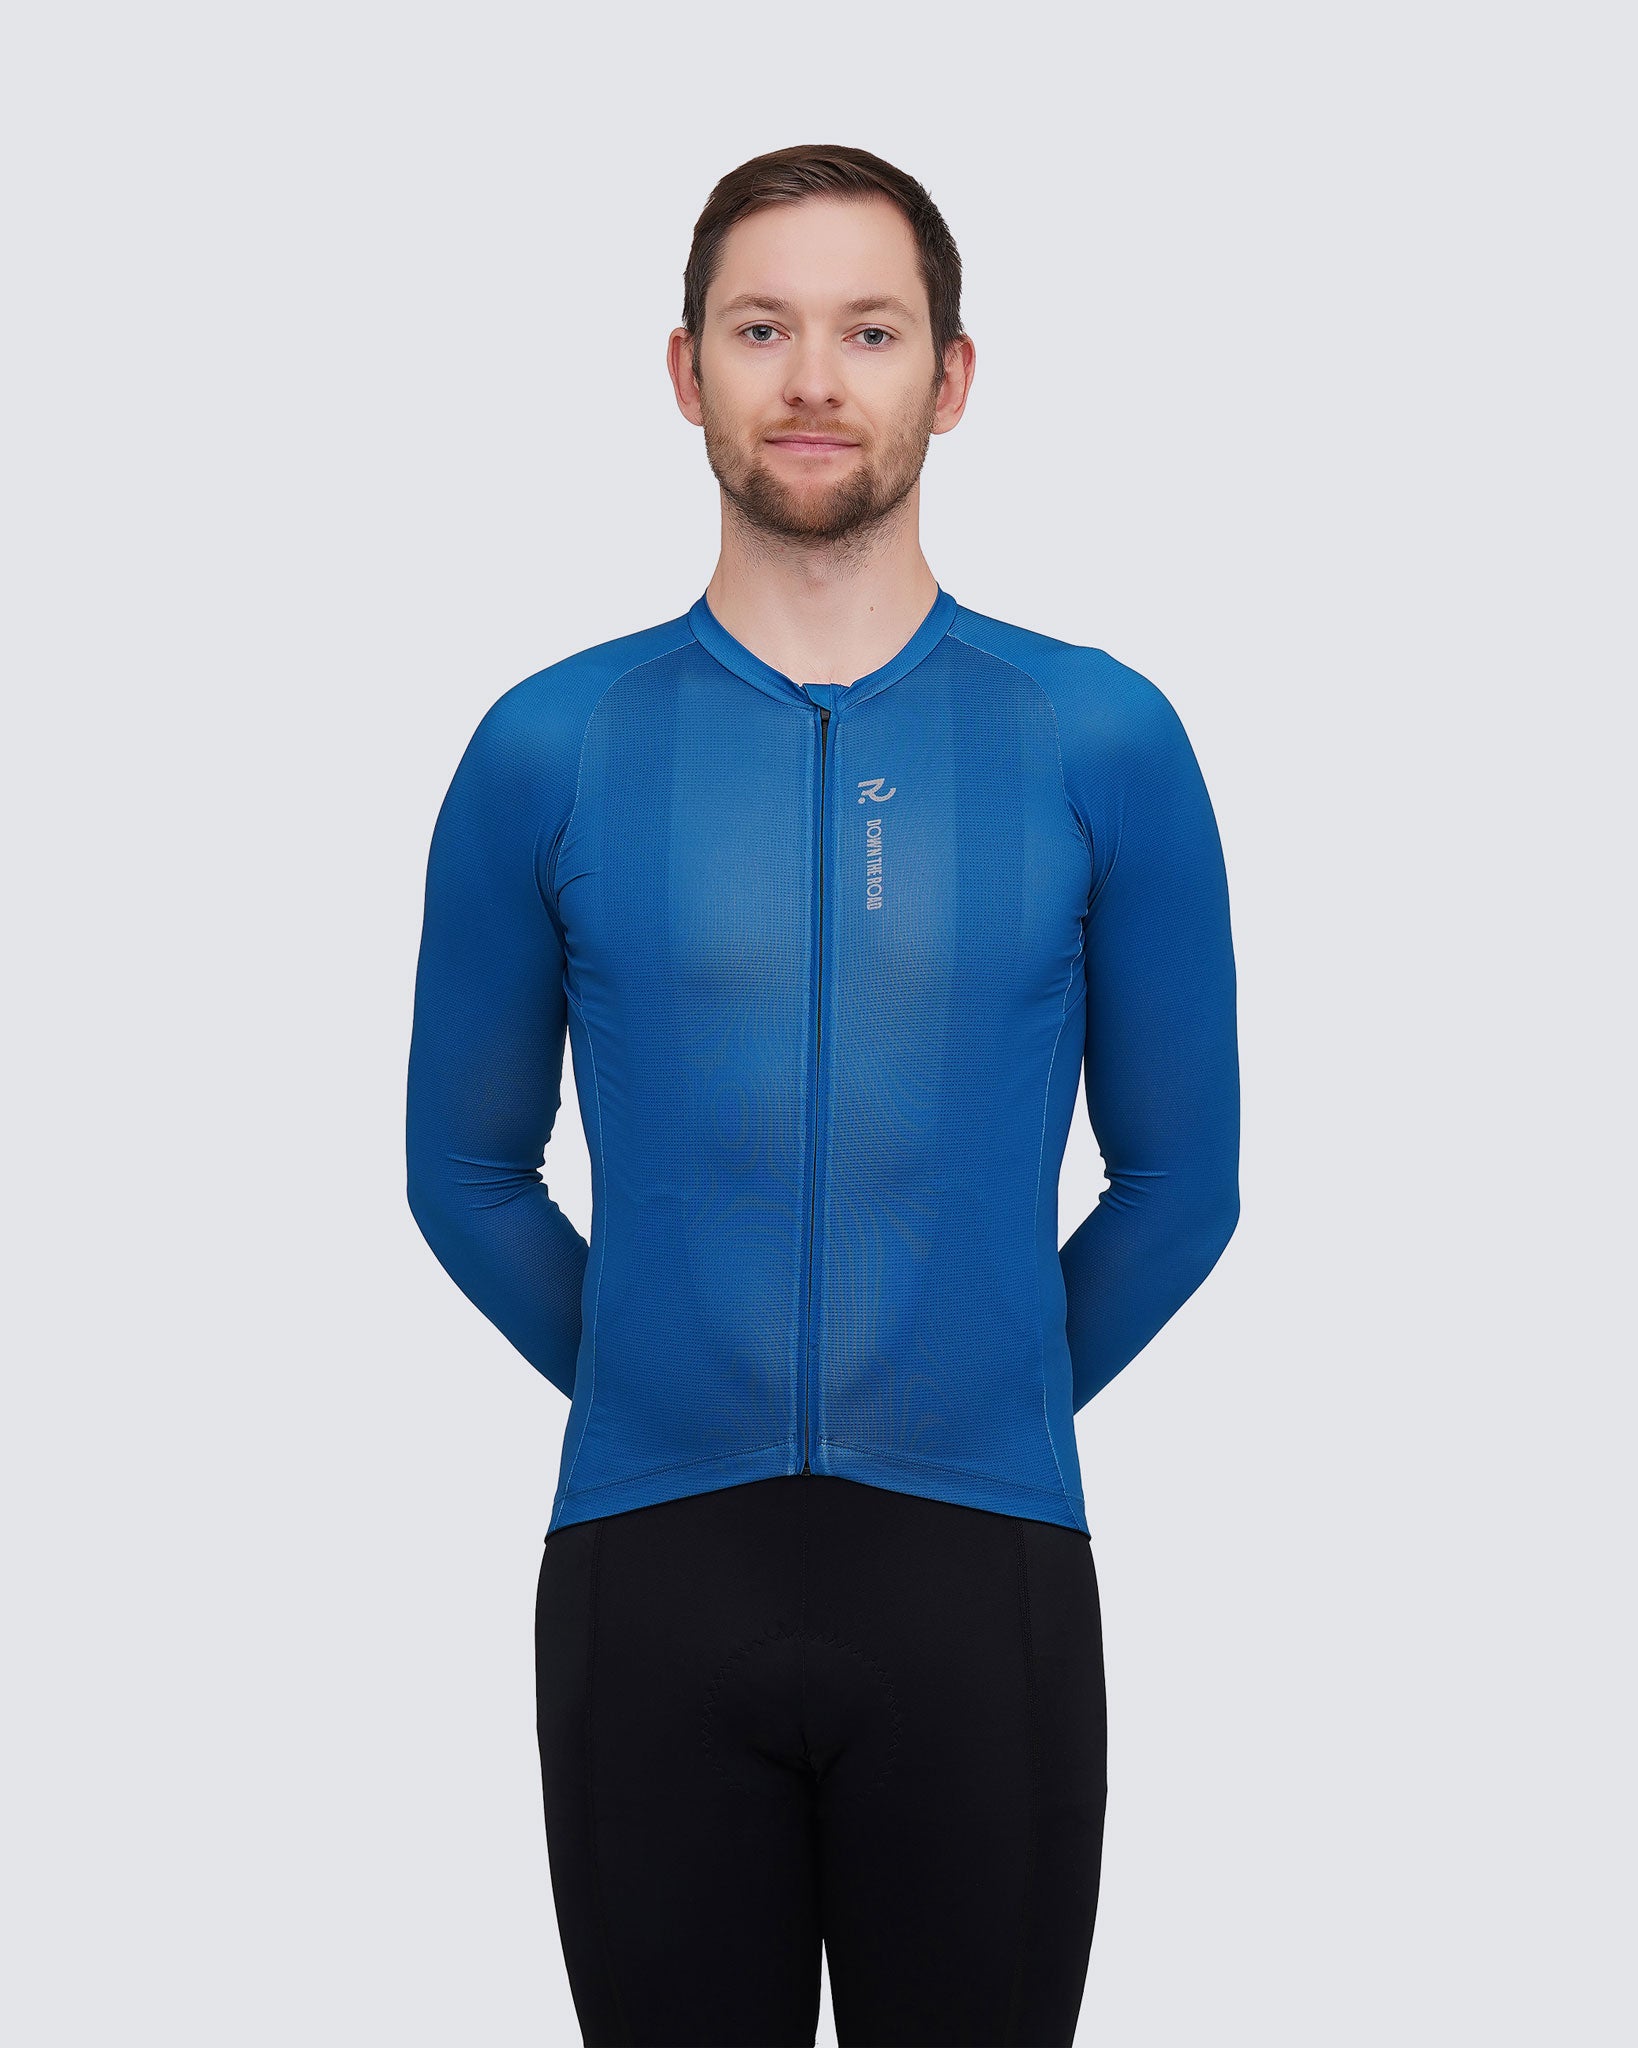 Wavy teal men long sleeve jersey  front view